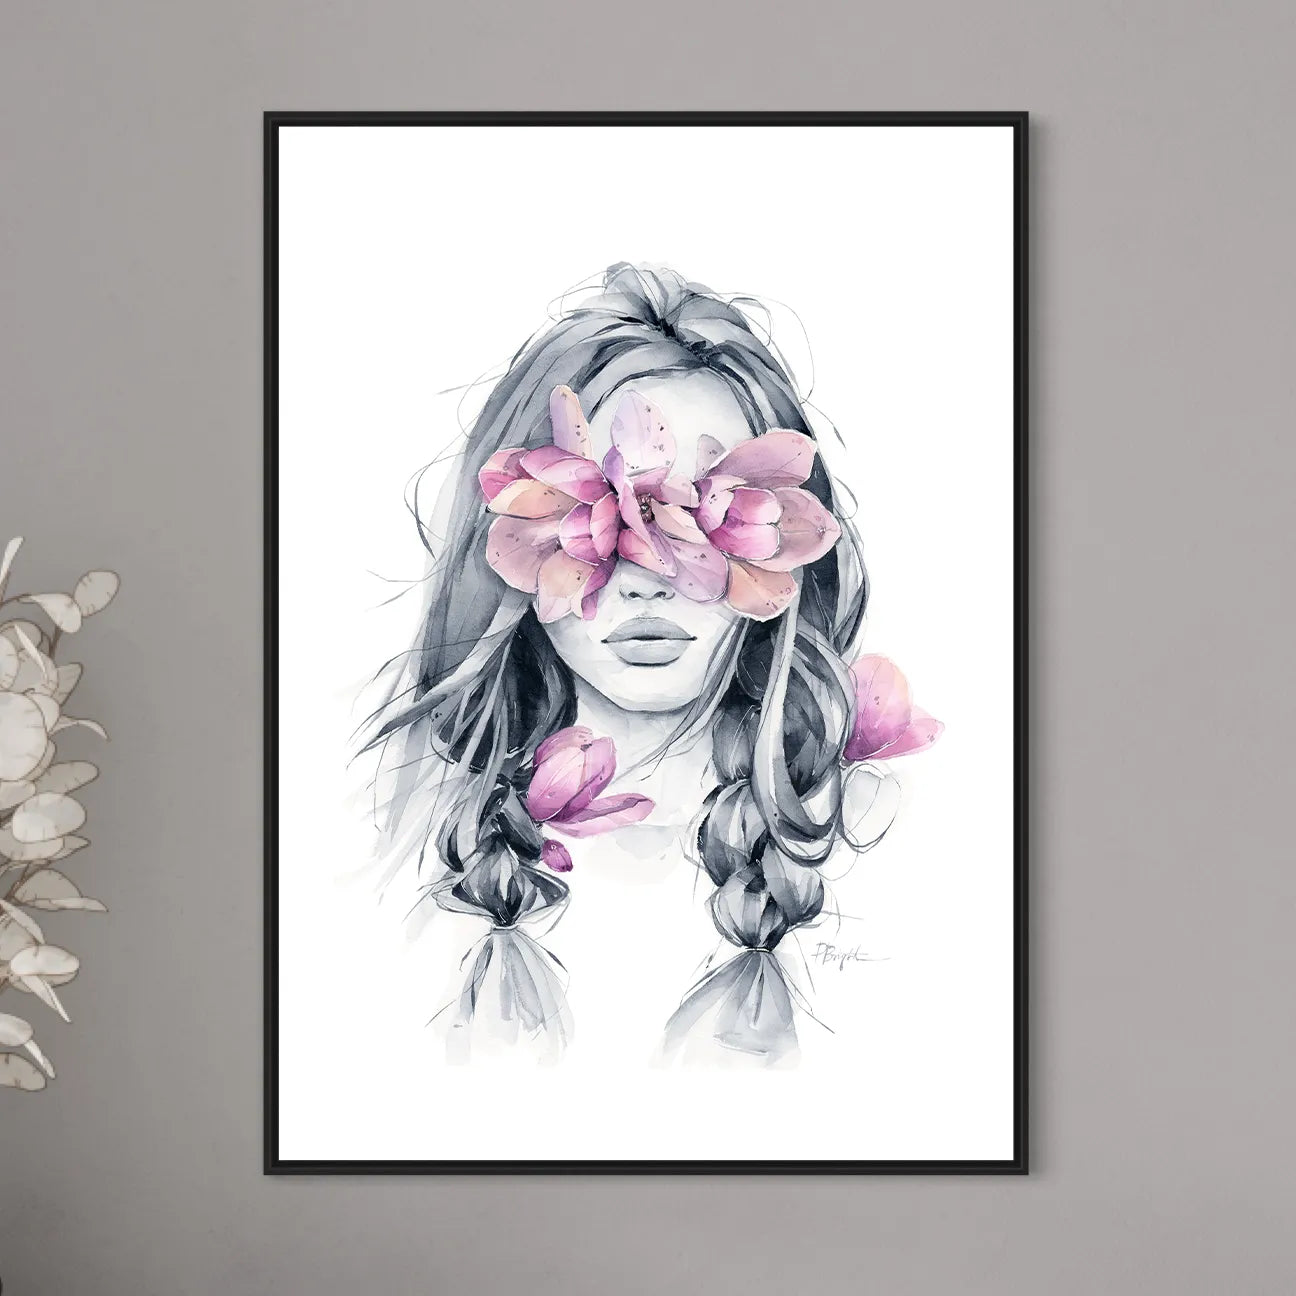 Wild magnolia blindfolded print by Polina Bright